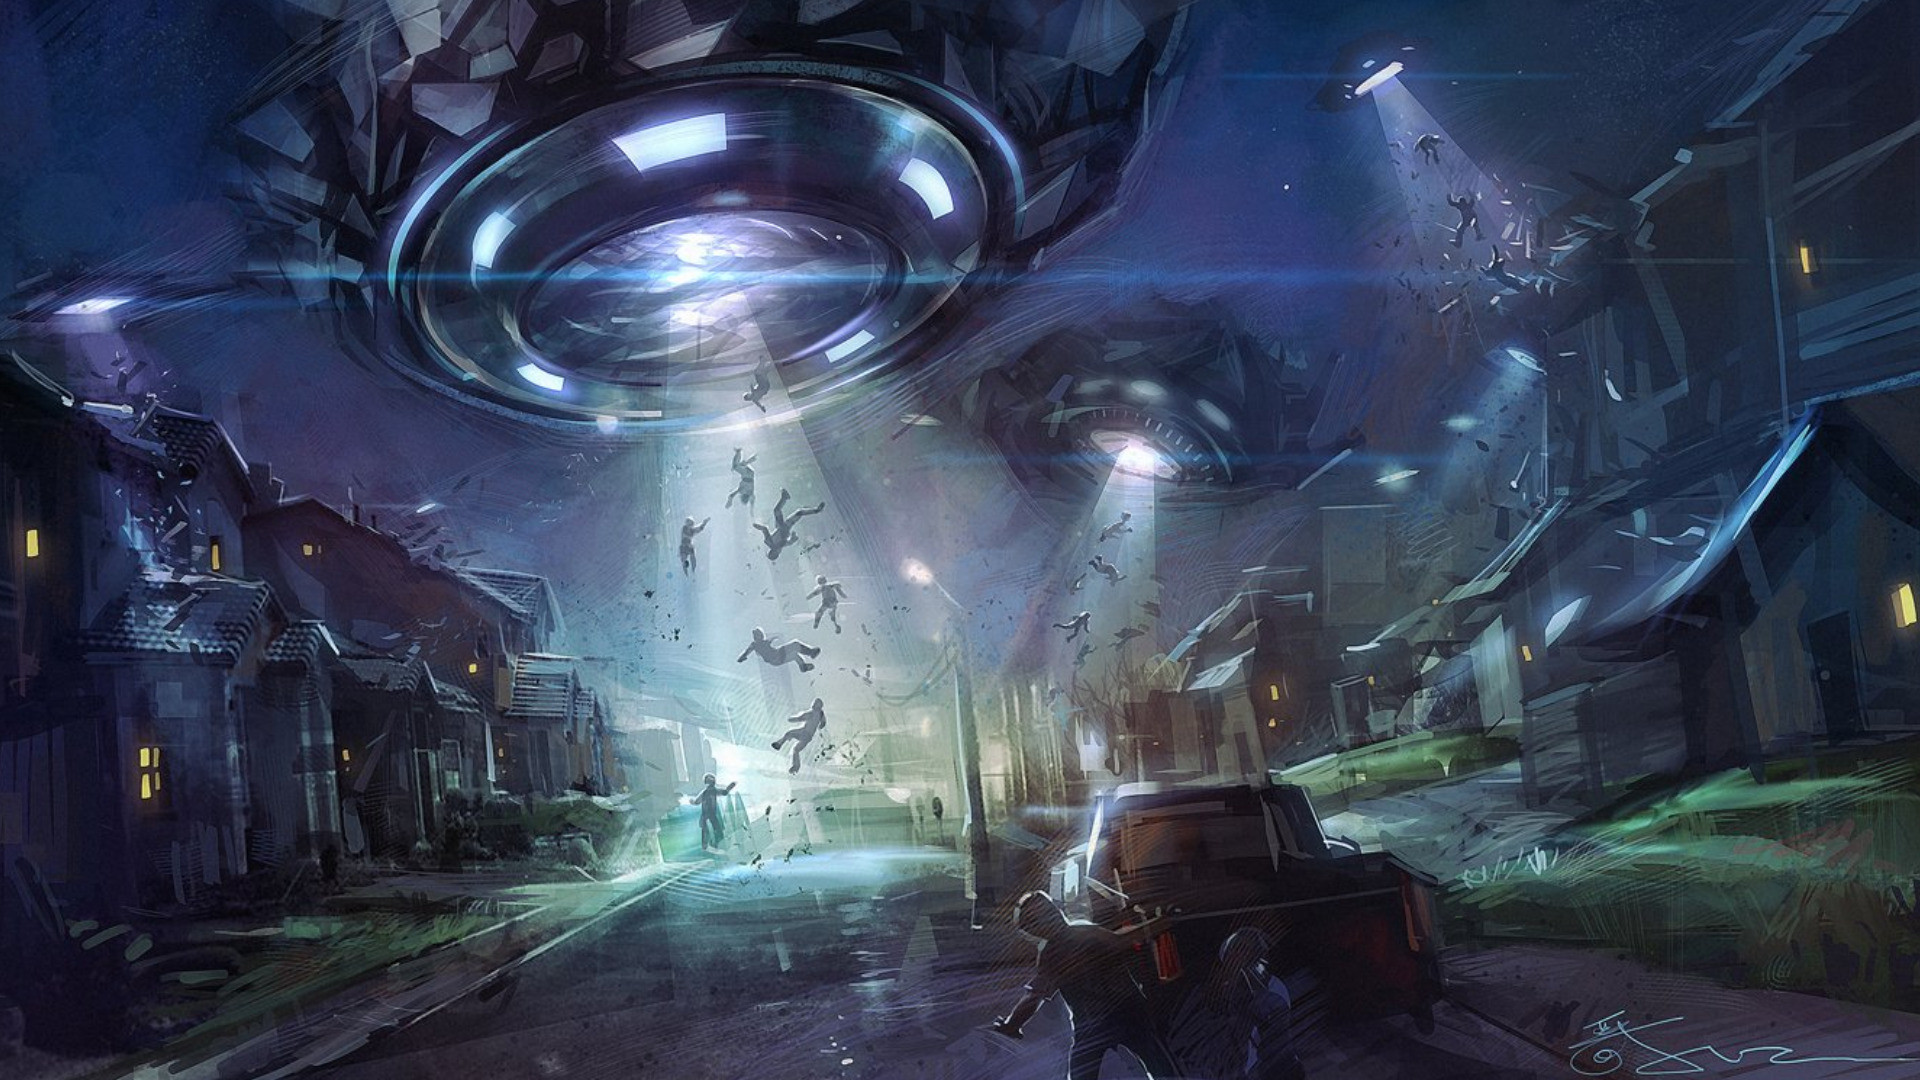 1920x1080 wallpaper UFO abducts people.